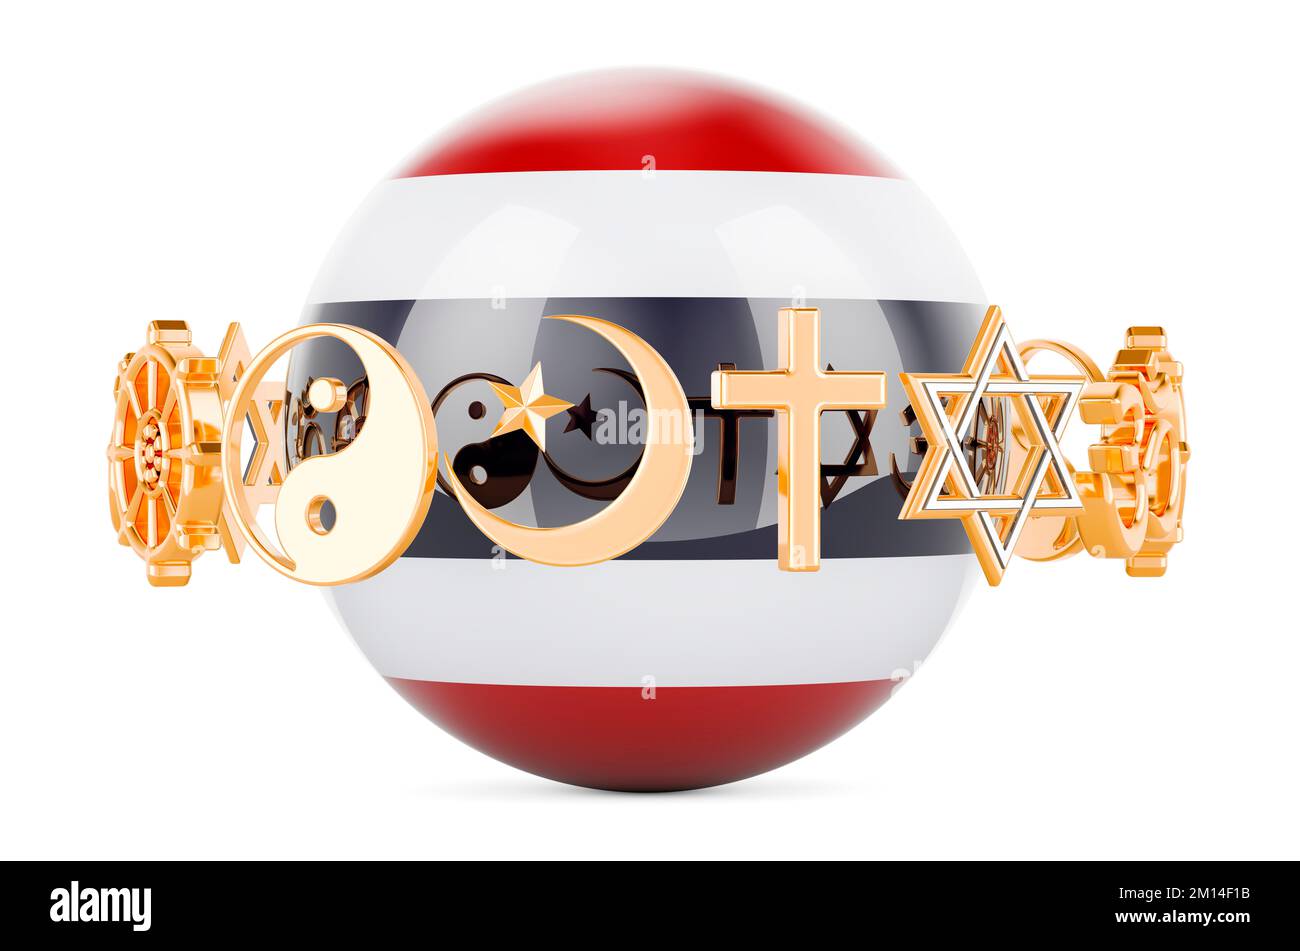 Thai flag painted on sphere with religions symbols around, 3D rendering isolated on white background Stock Photo